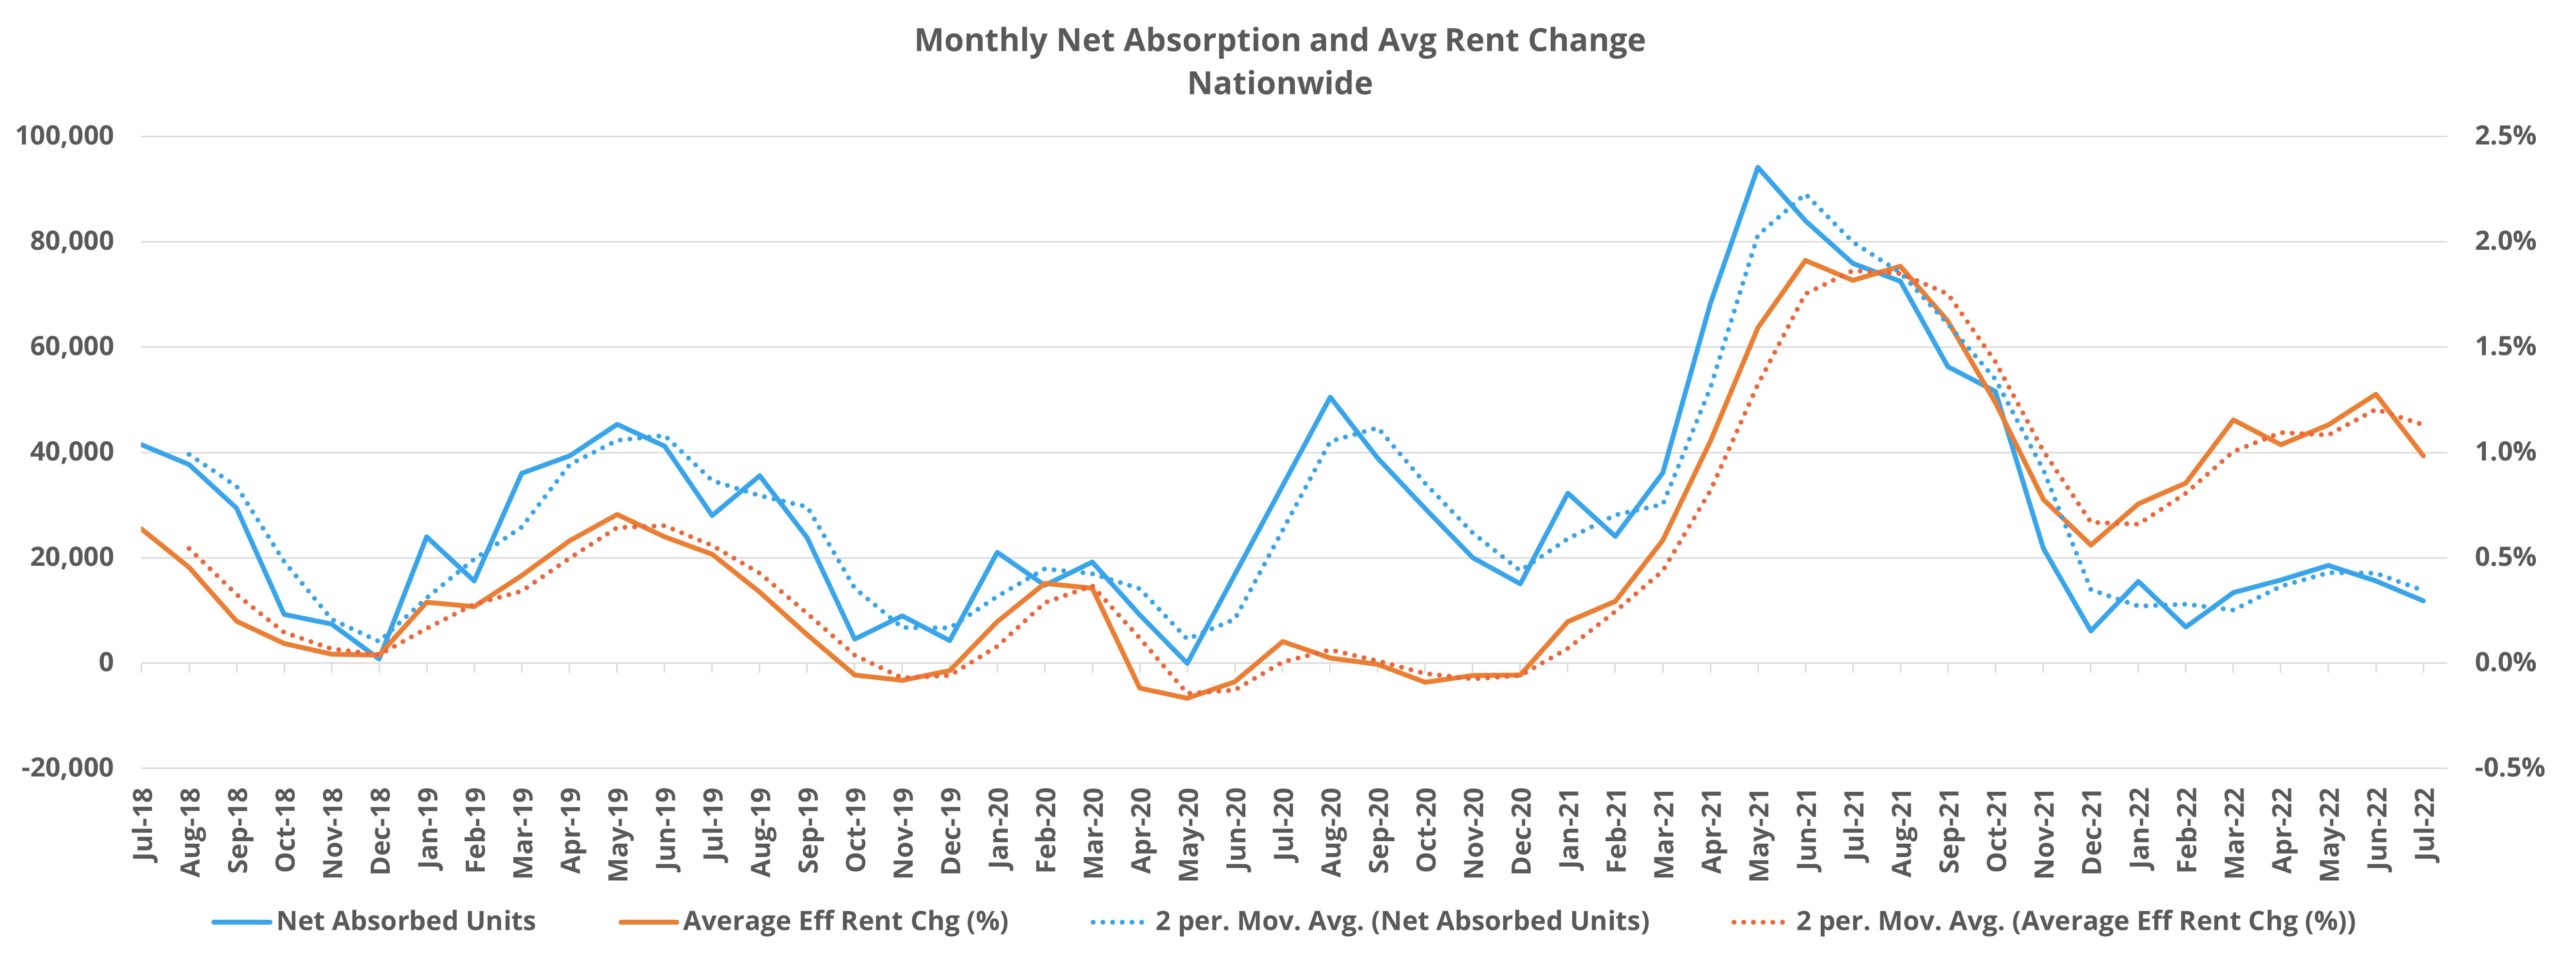 Monthly Net Absorption and Avg Rent Change